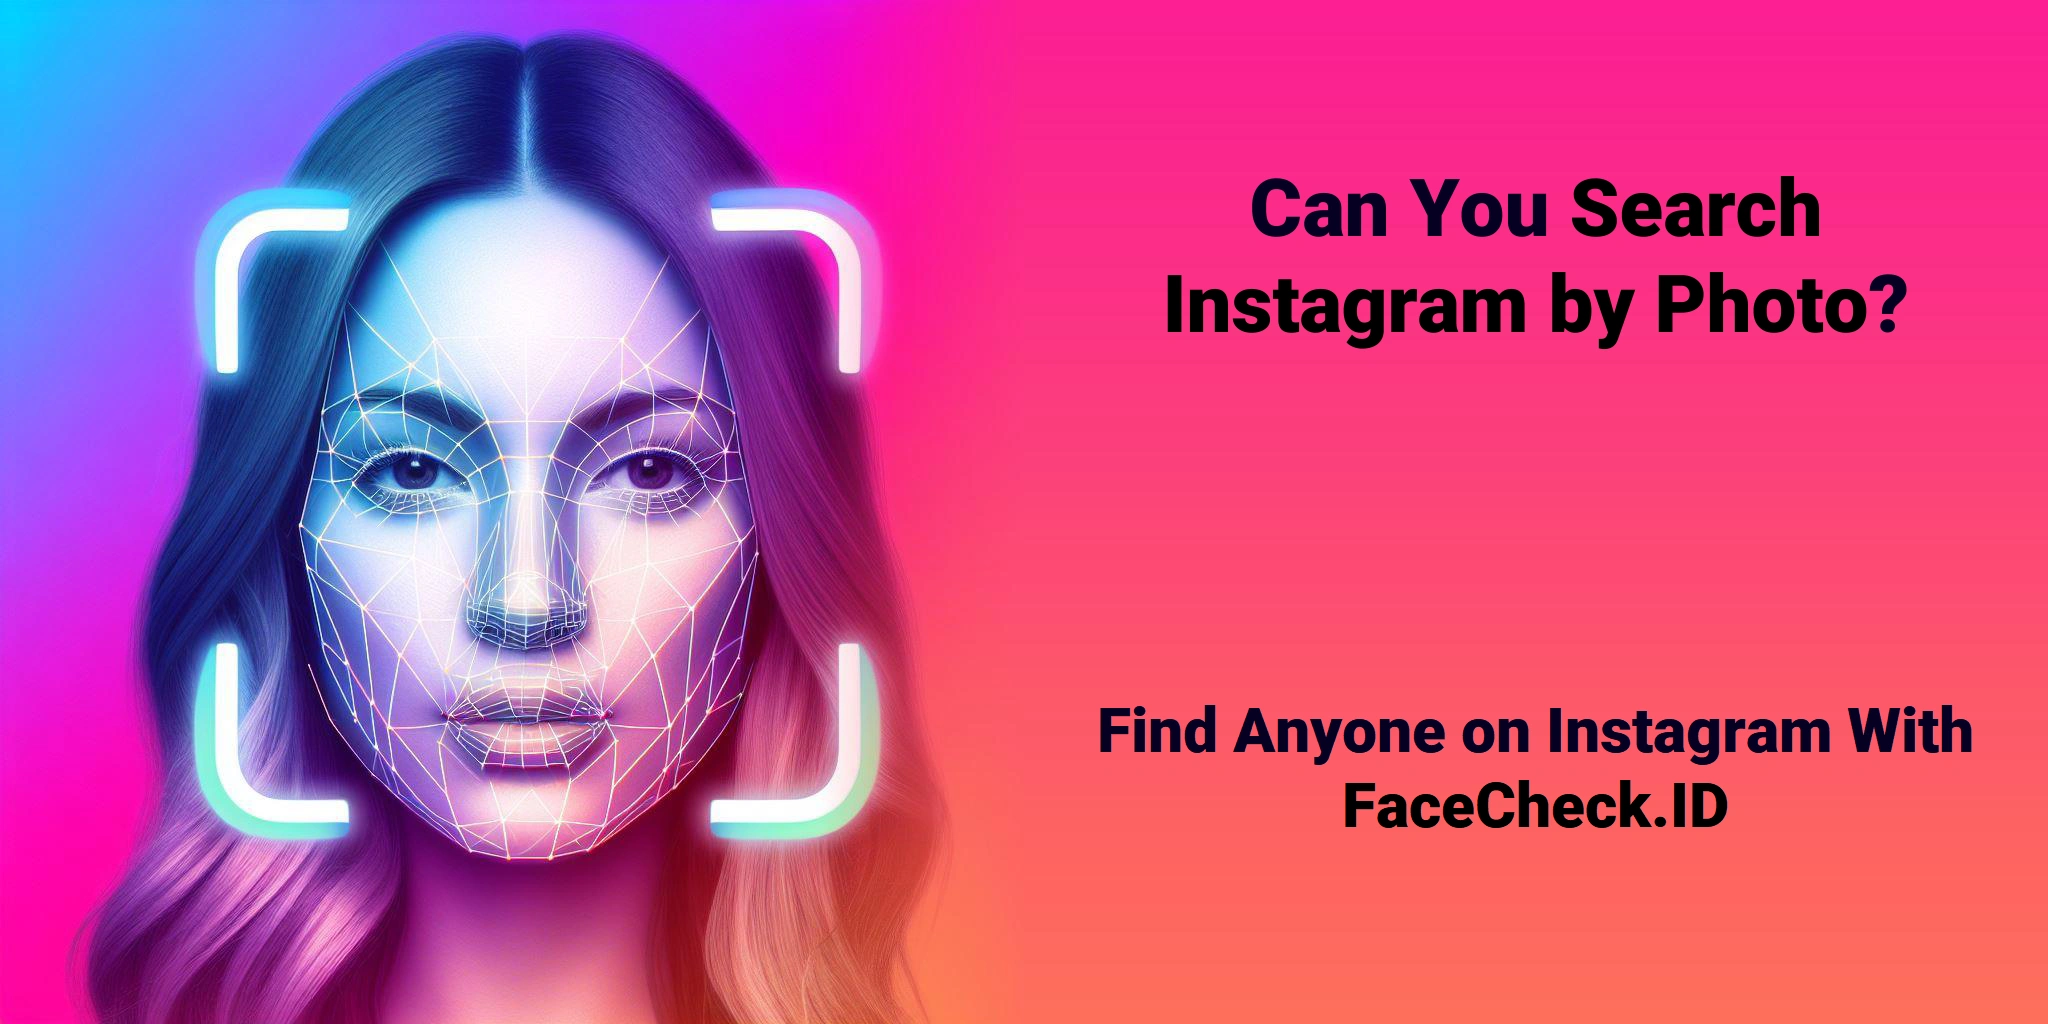 Can You Search Instagram by Photo? Find Anyone on Instagram With FaceCheck.ID